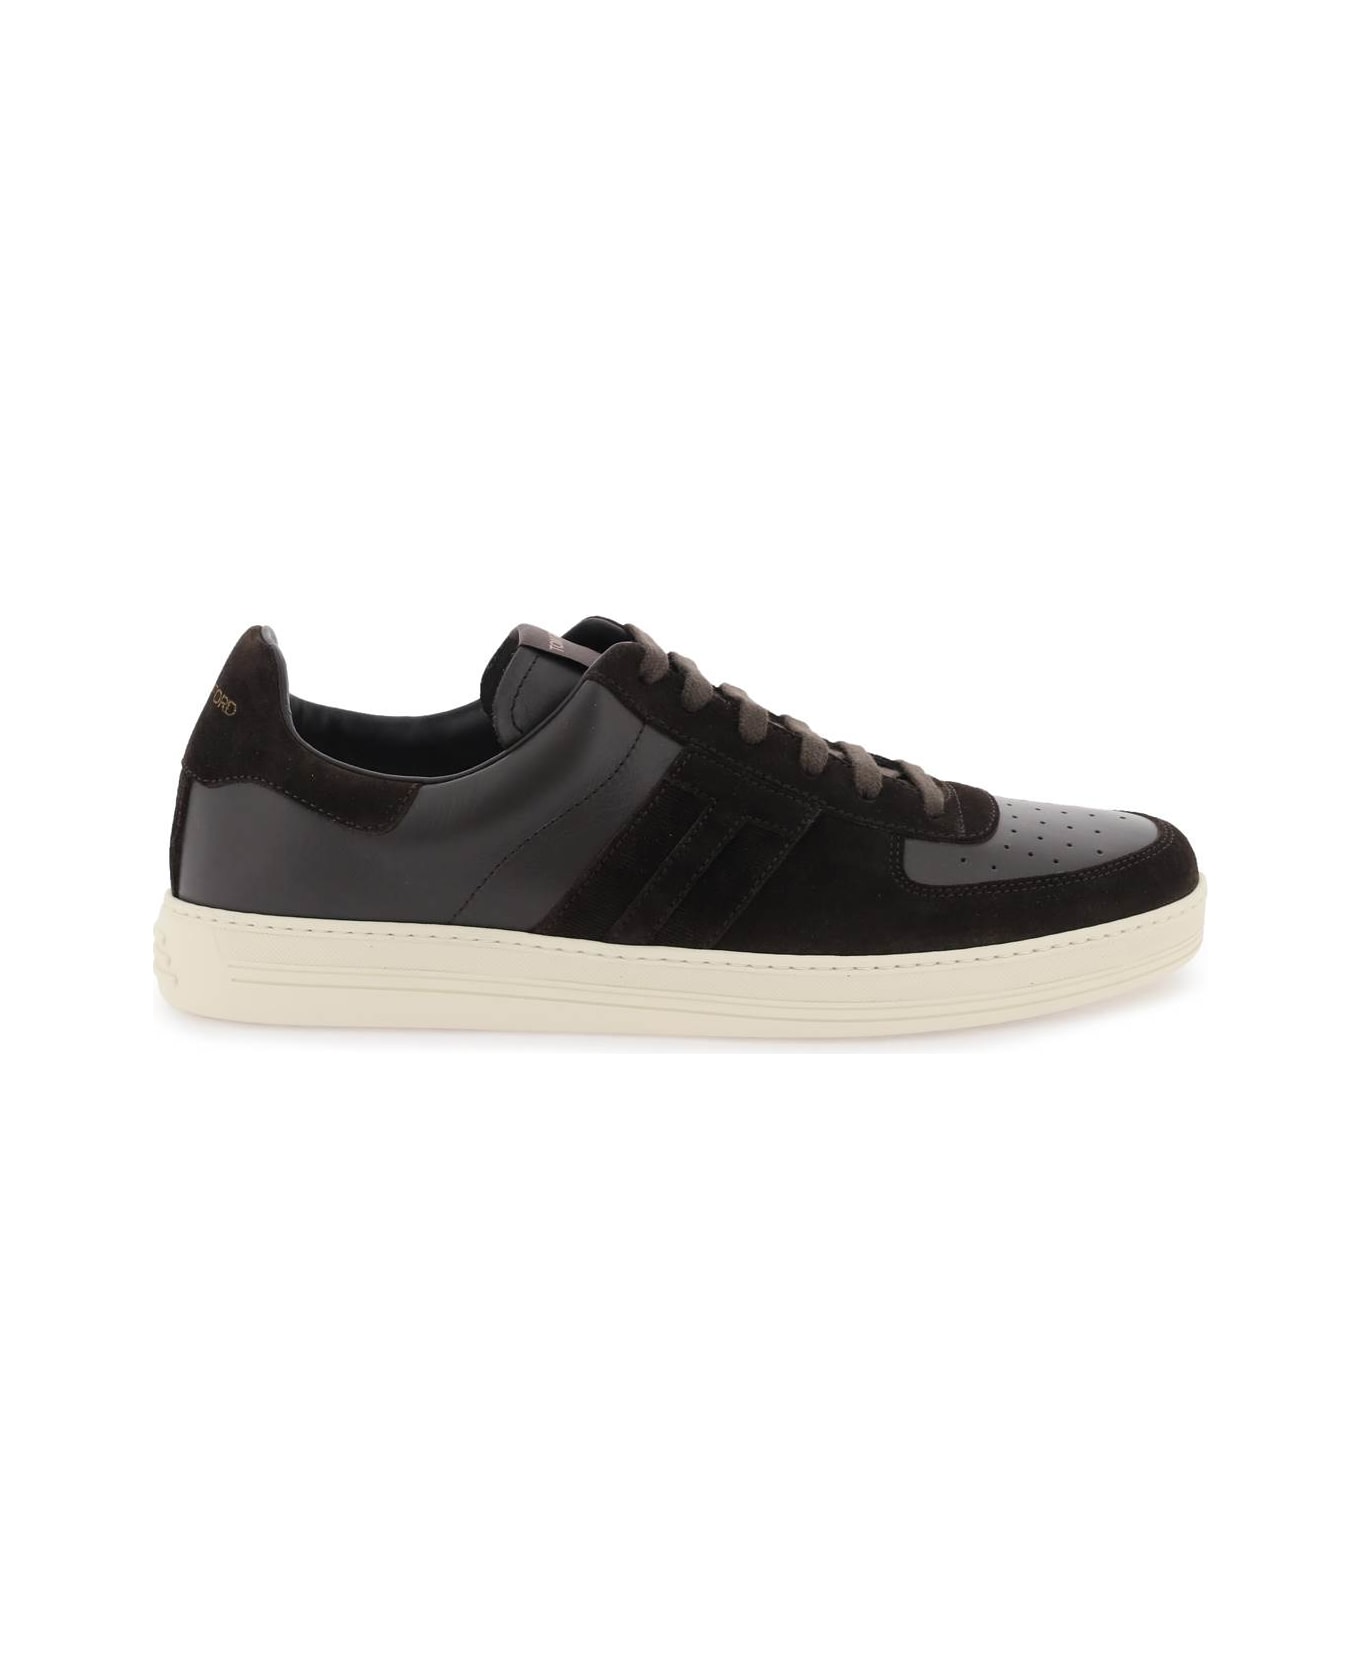 Tom Ford Radcliffe Low Top Sneakers - Brown/cream